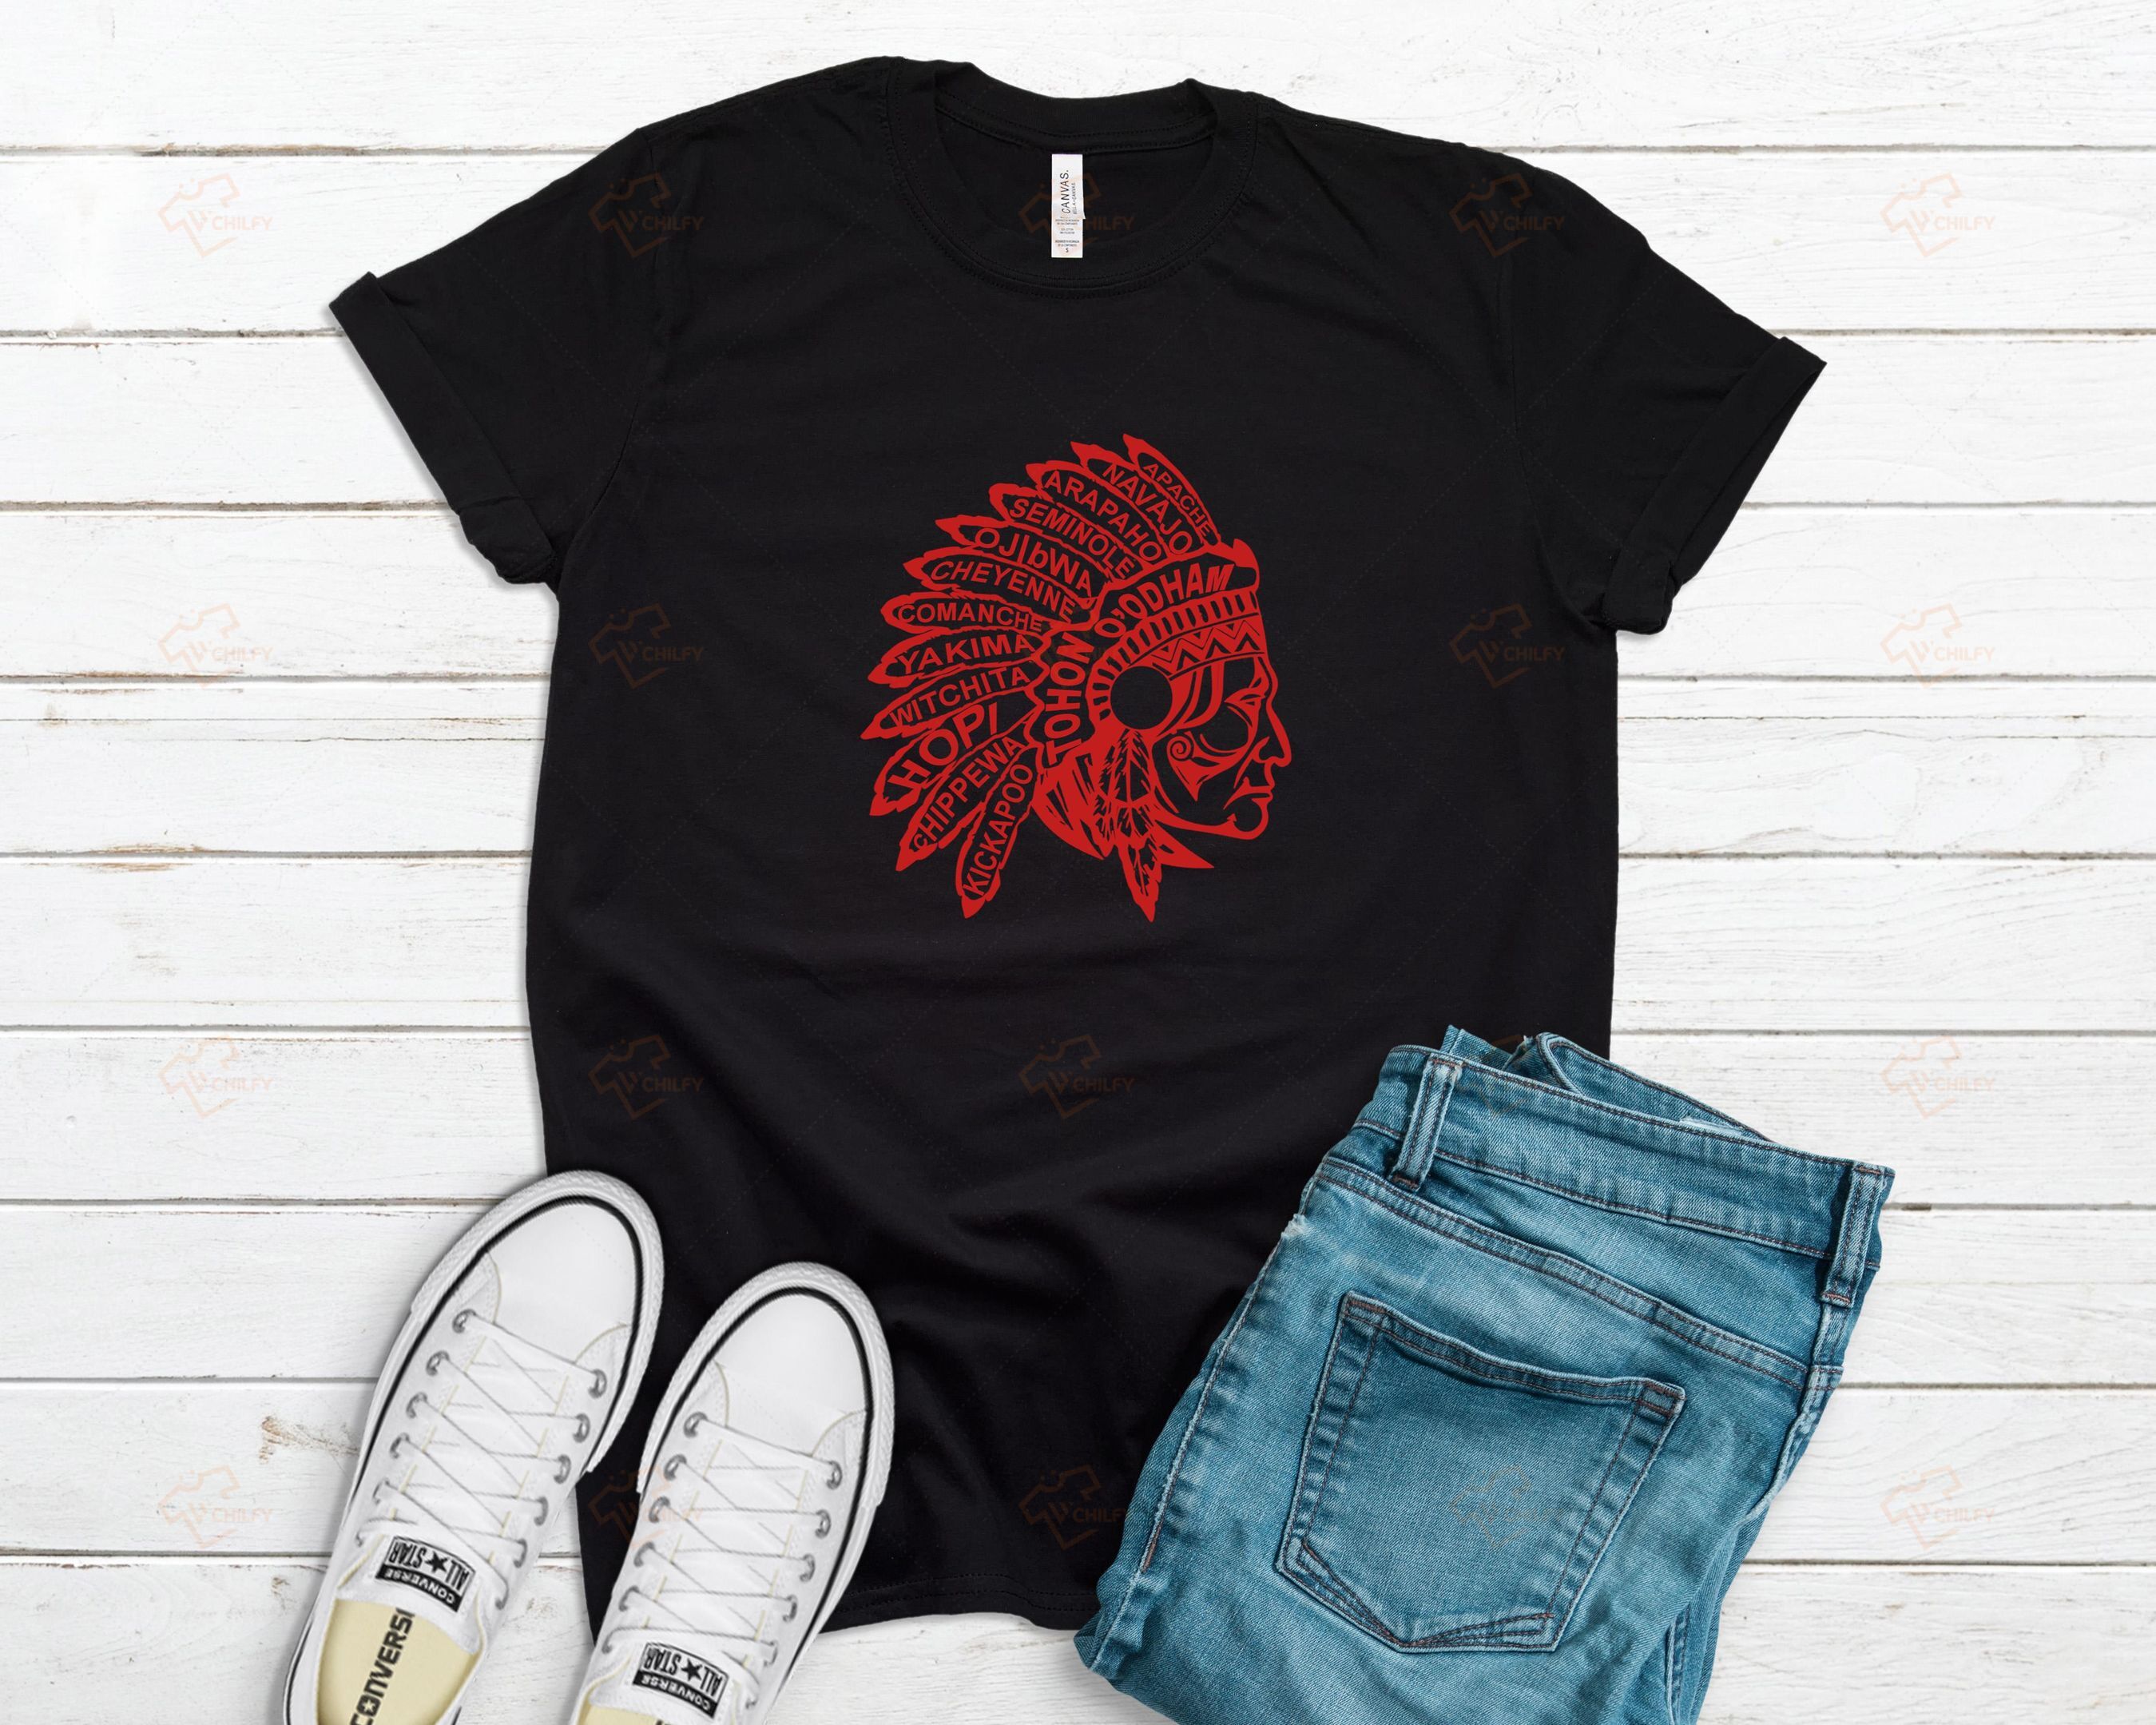 Native tribes shirt, badass Native t shirt, Native American shirt, gift for Indigenous people